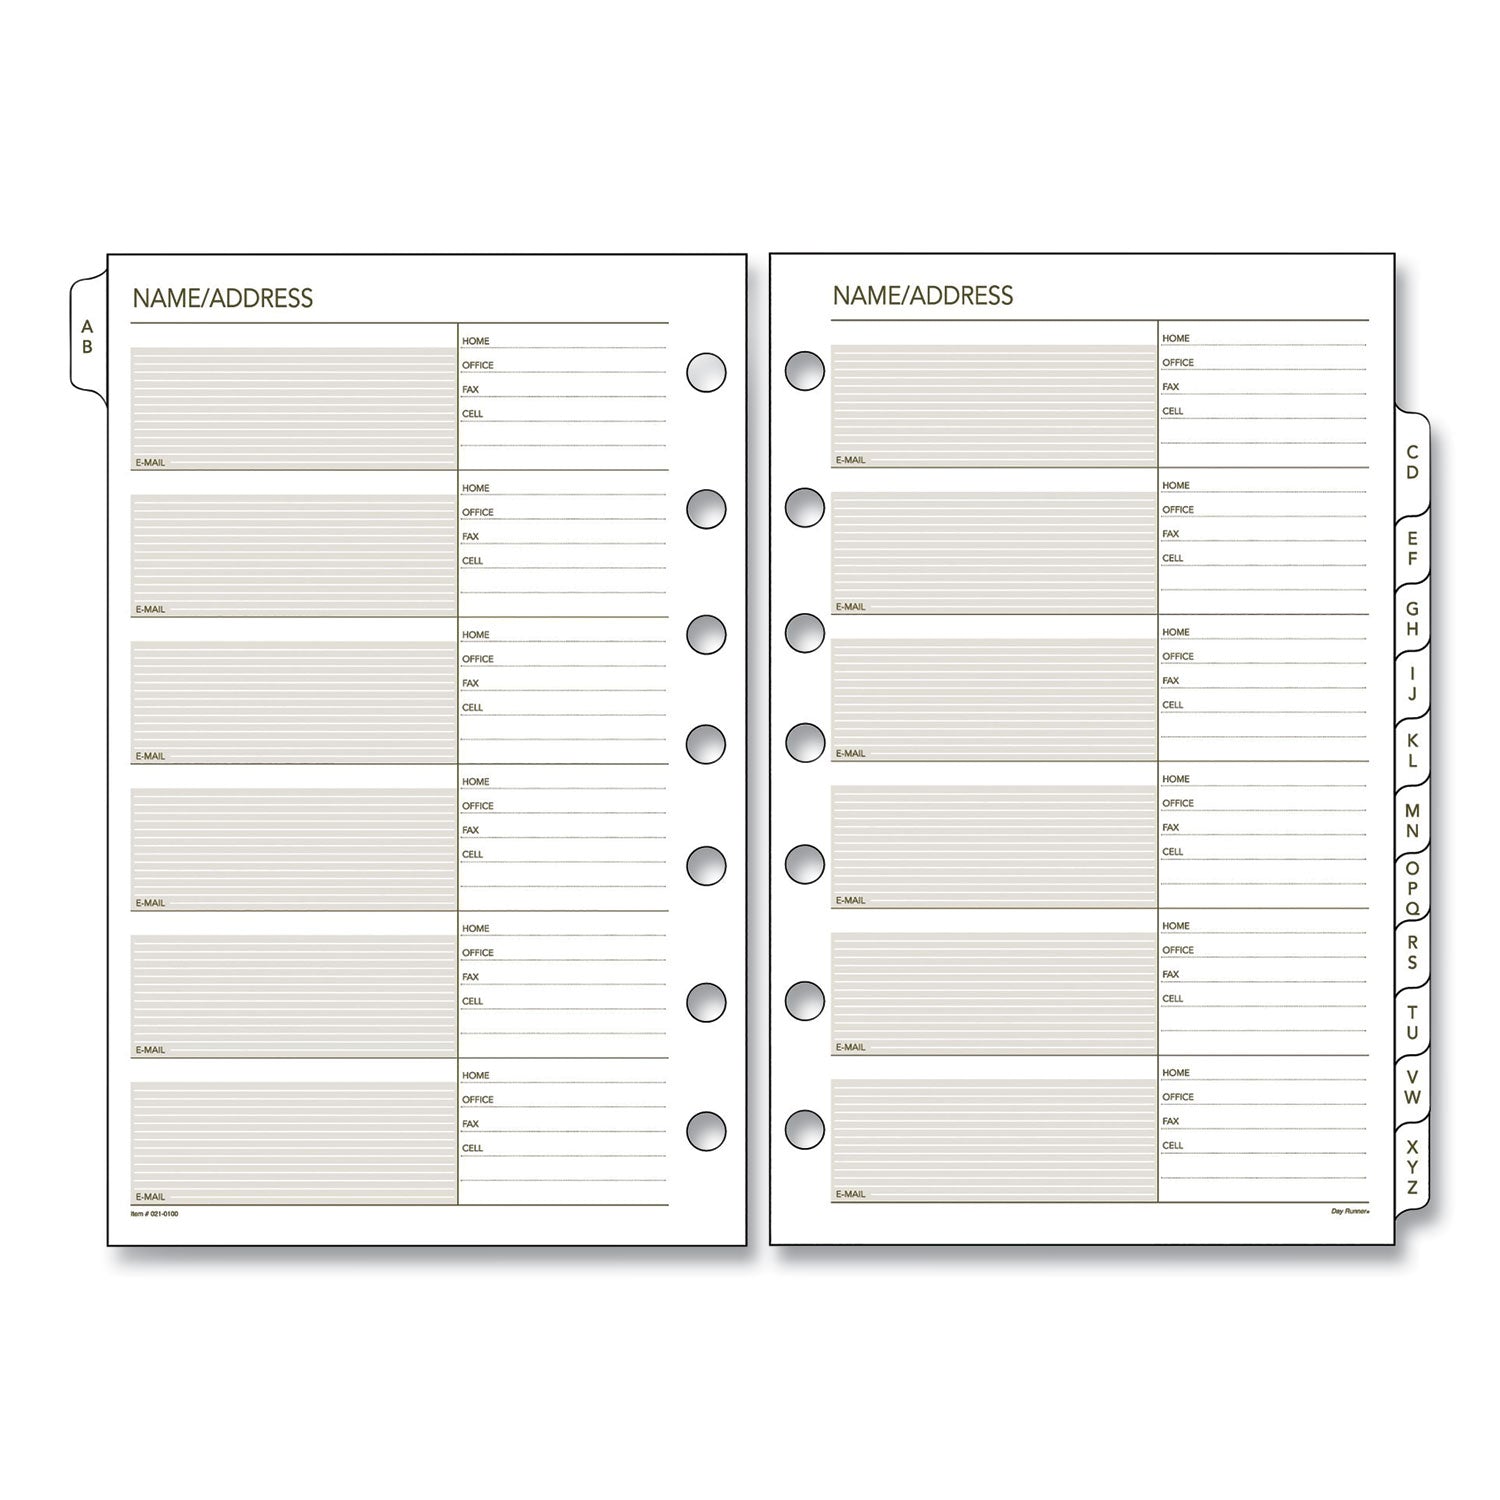 telephone-address-1-12-cut-a-z-tab-refill-for-planners-organizers-85-x-55-white-sheets-undated_drn210100 - 1